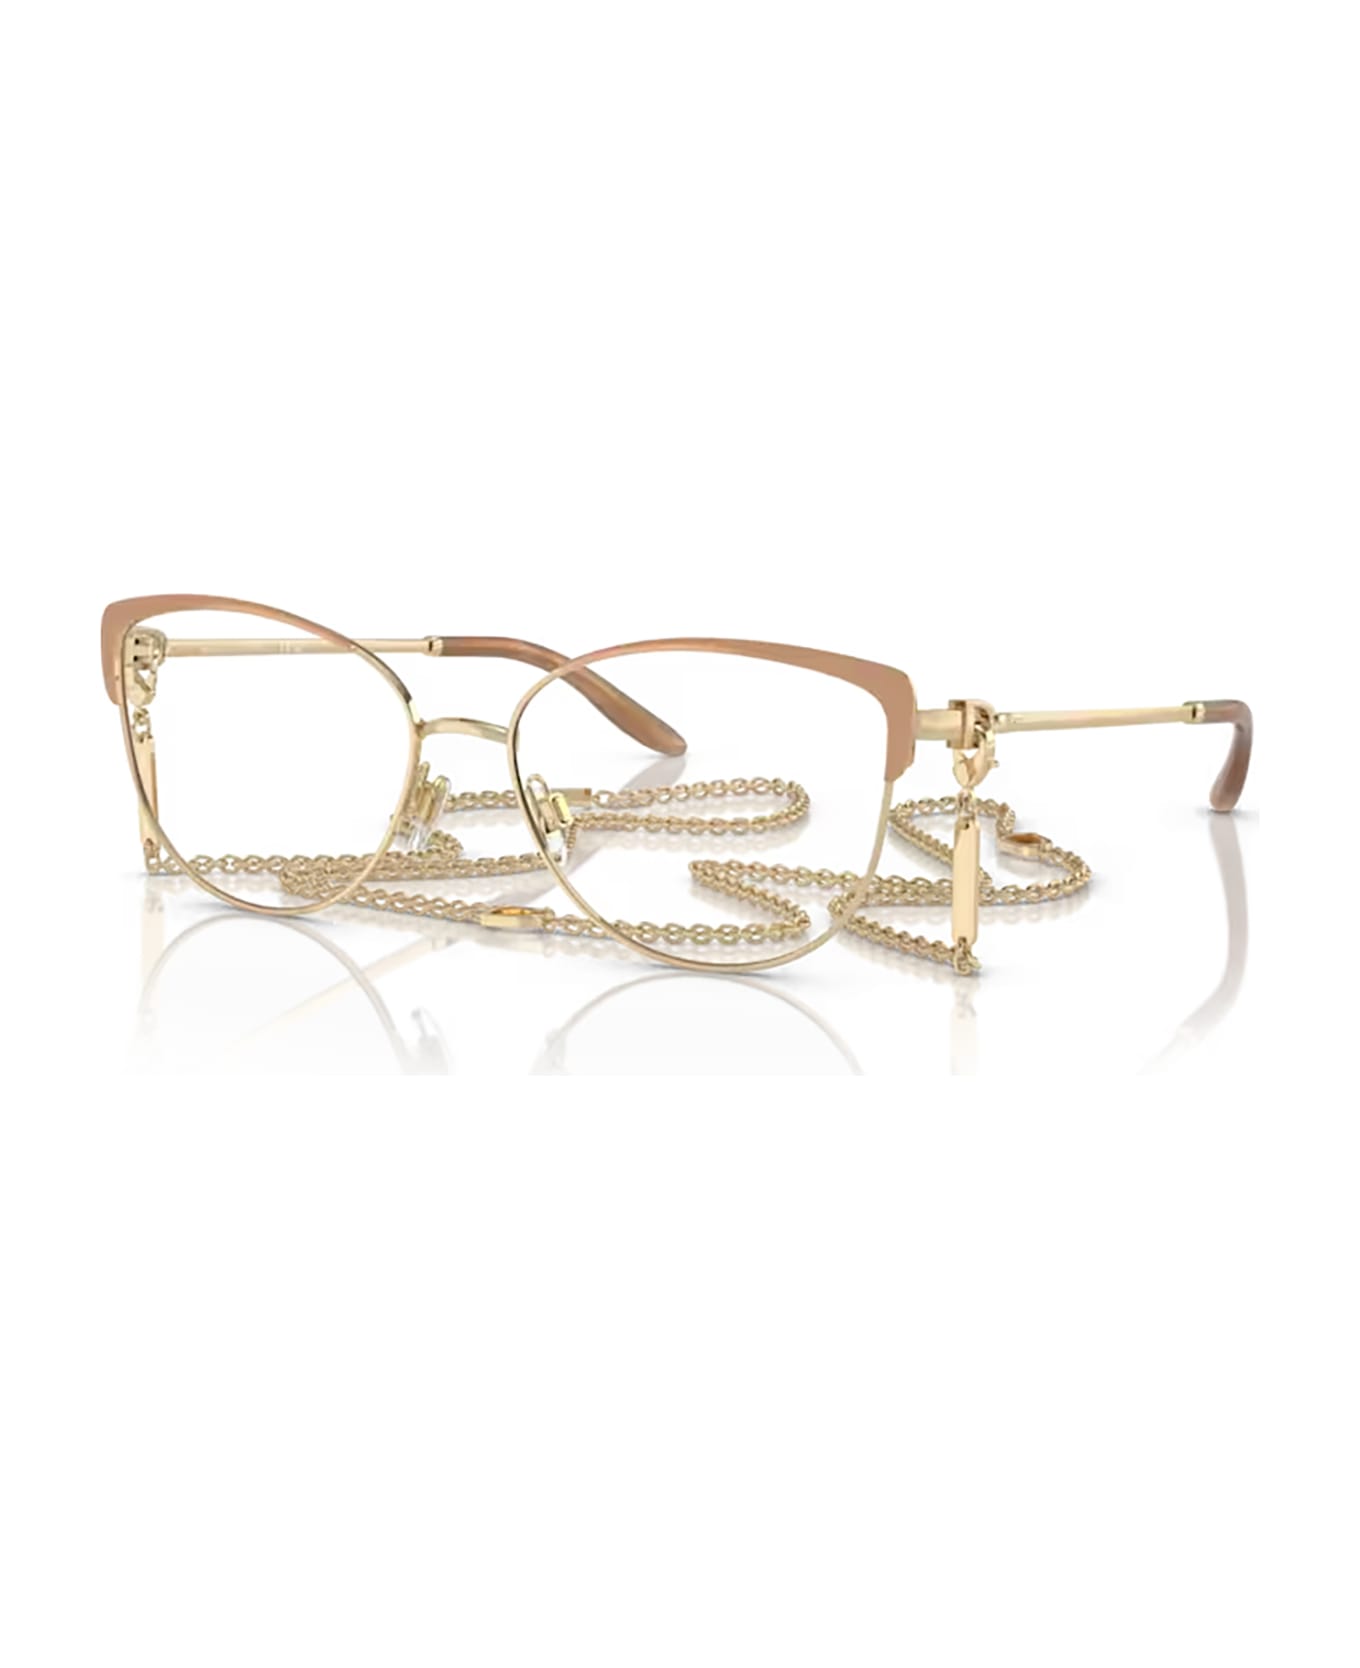 Ralph Lauren Rl5123 Nude / Pale Gold Glasses - Nude / Pale Gold